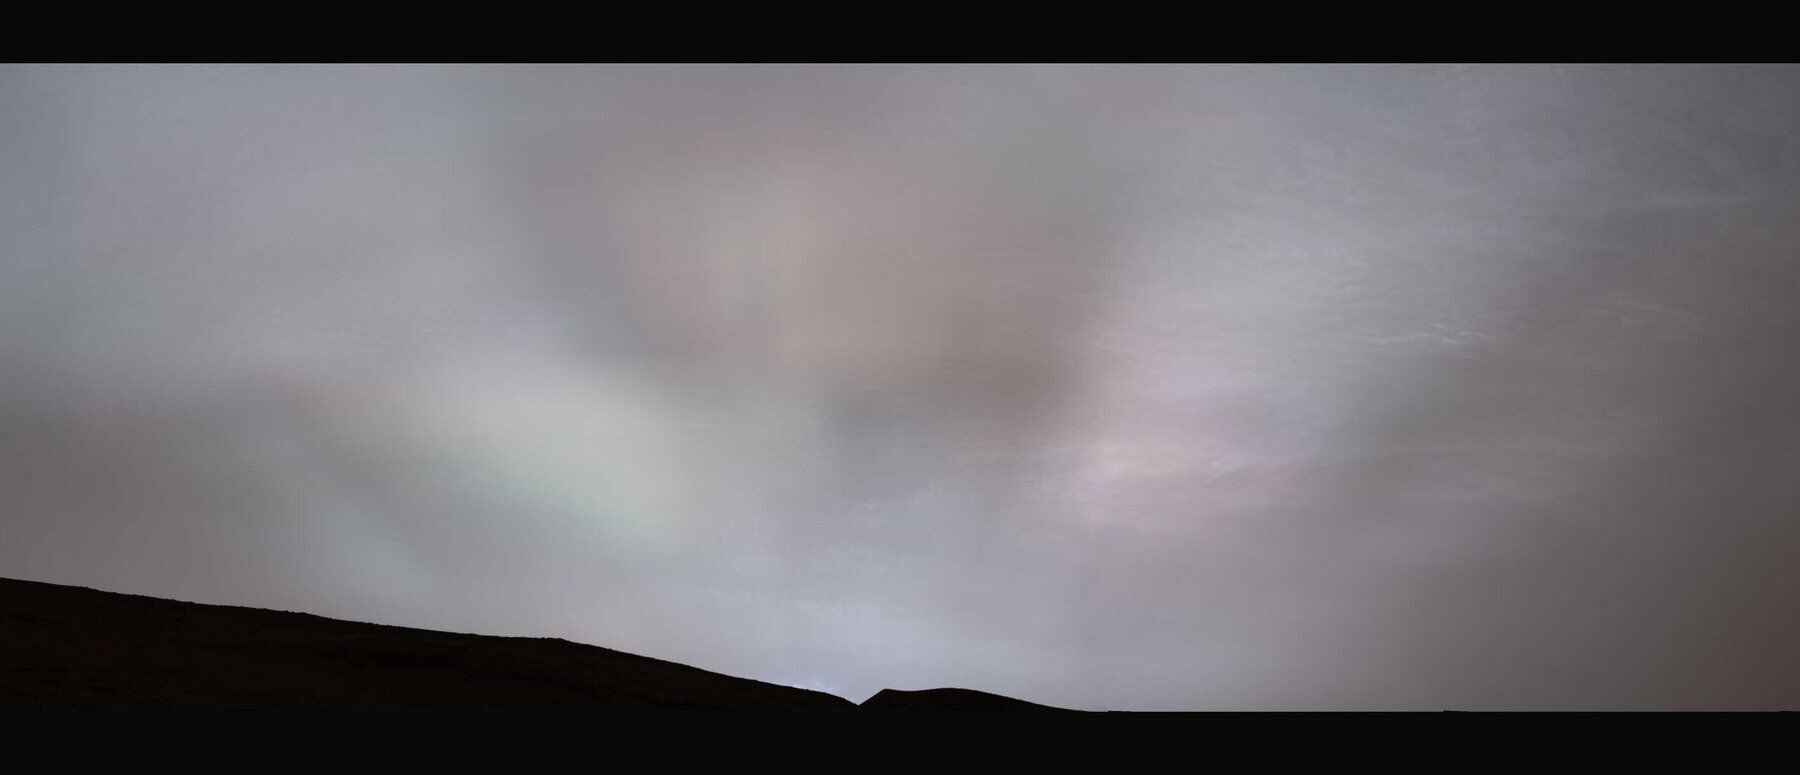 NASA's Curiosity rover captured these ''sunbeams'' shining through the clouds at sunset on February 2, 2023, the 3730th Martian day